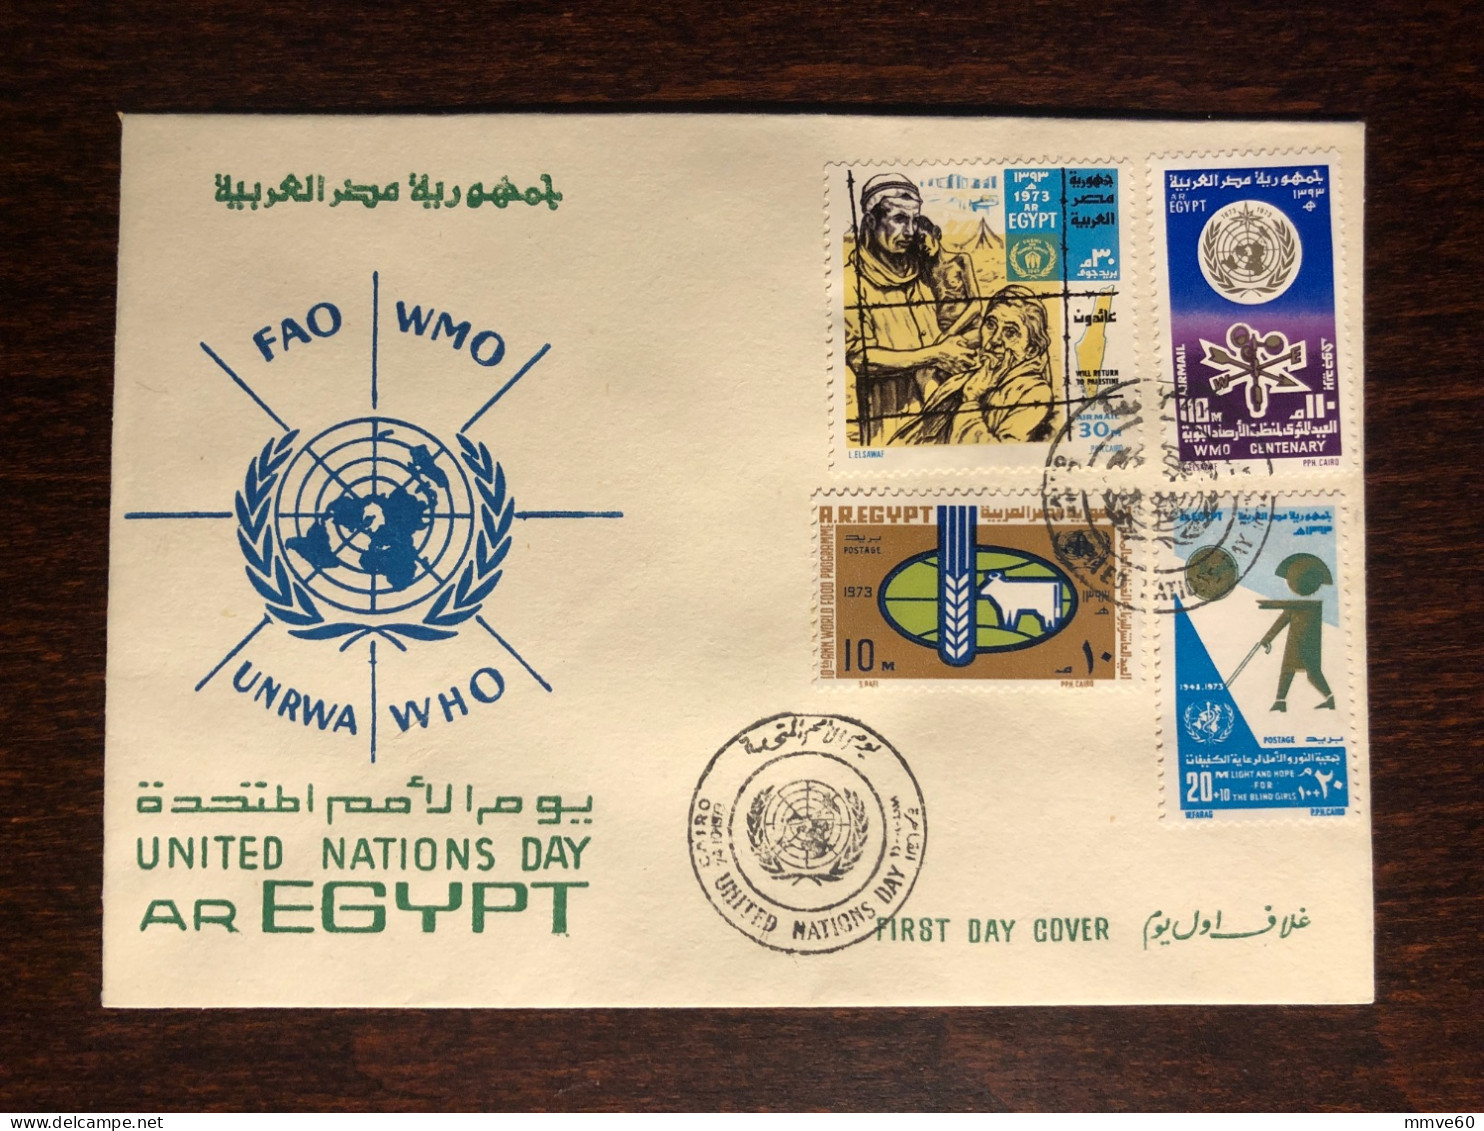 EGYPT FDC COVER 1973 YEAR WHO OPHTHALMOLOGY HEALTH MEDICINE - Briefe U. Dokumente